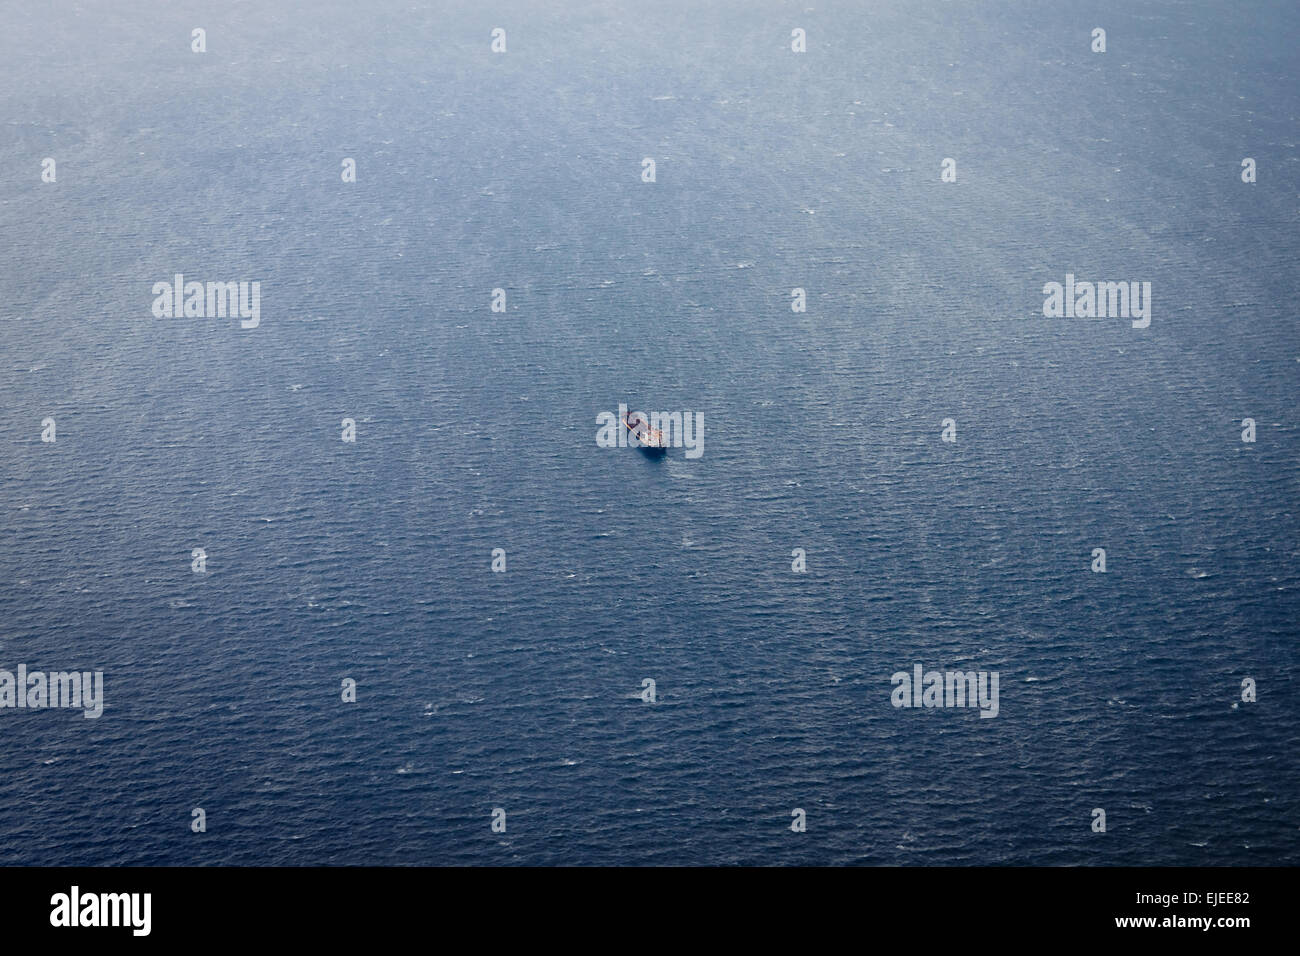 Aerial side view of oil tanker ship on open sea Stock Photo